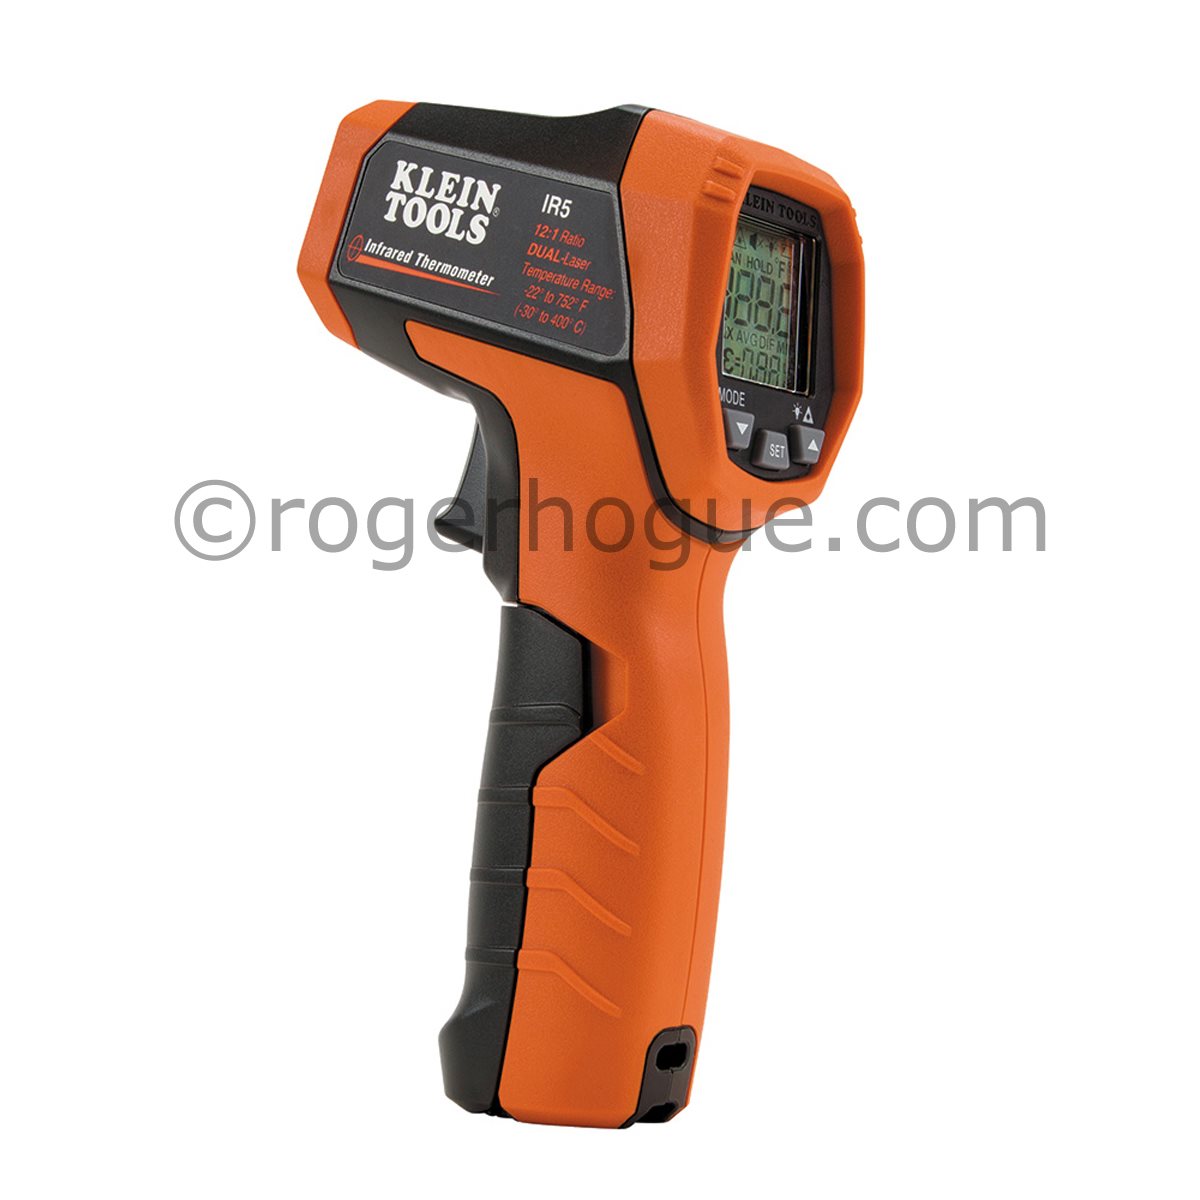 INFRARED THERMOMETER 12:1